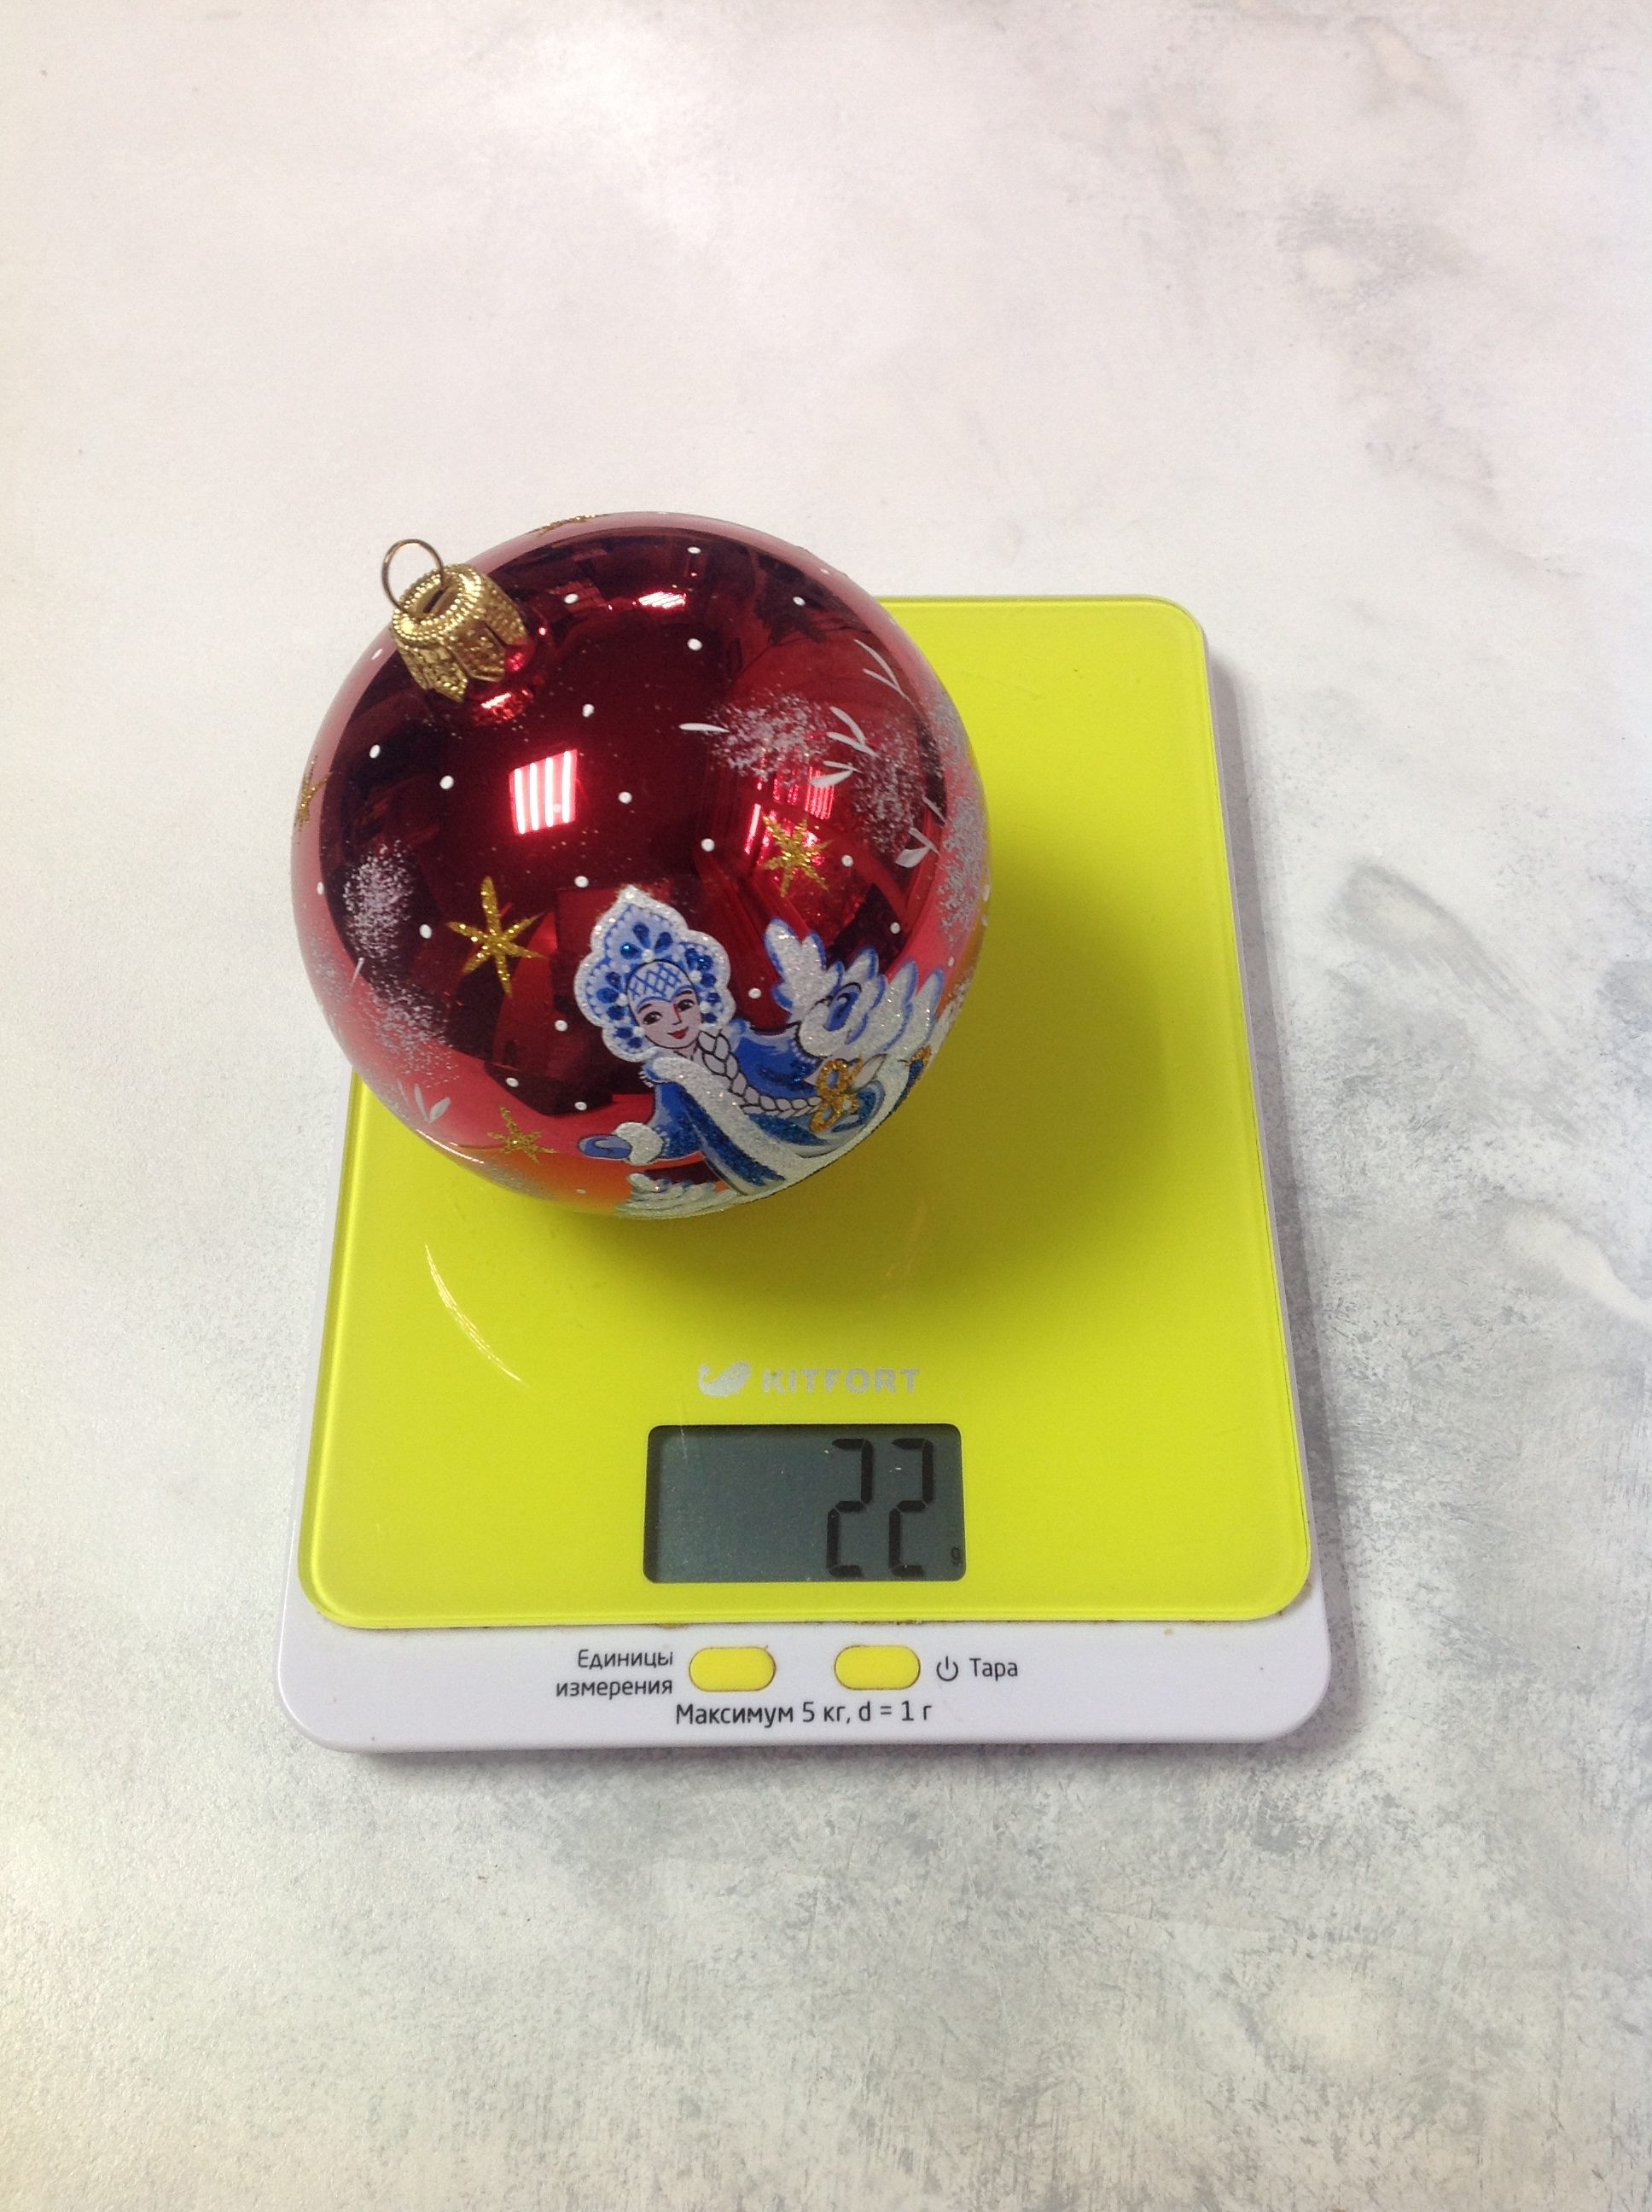 How much does a large plastic Christmas tree ball weigh?